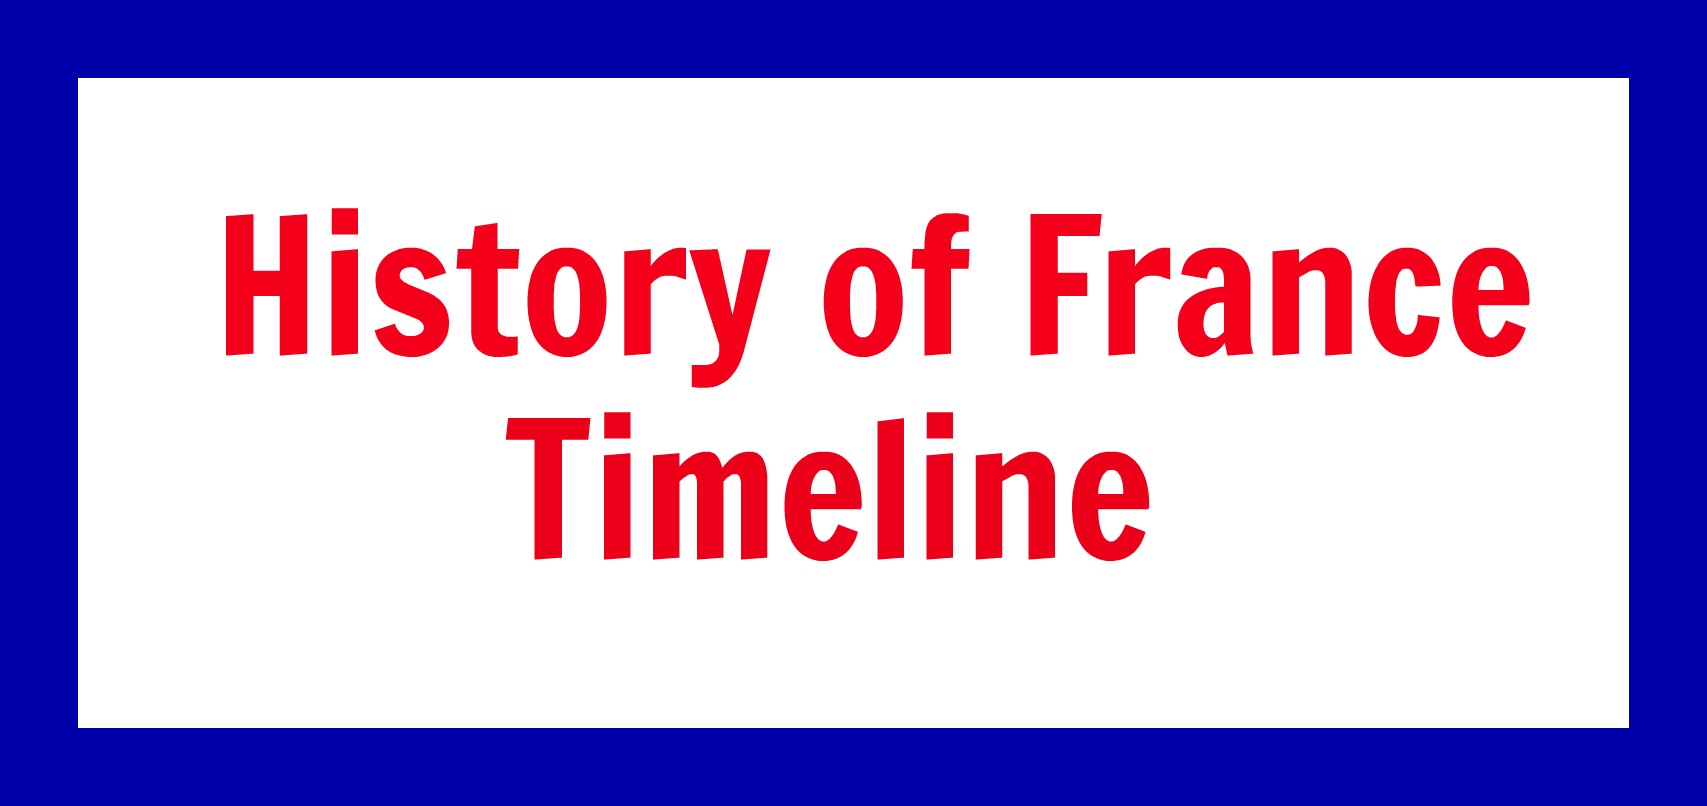 Timeline of the Rulers of France From 840 Until 2017